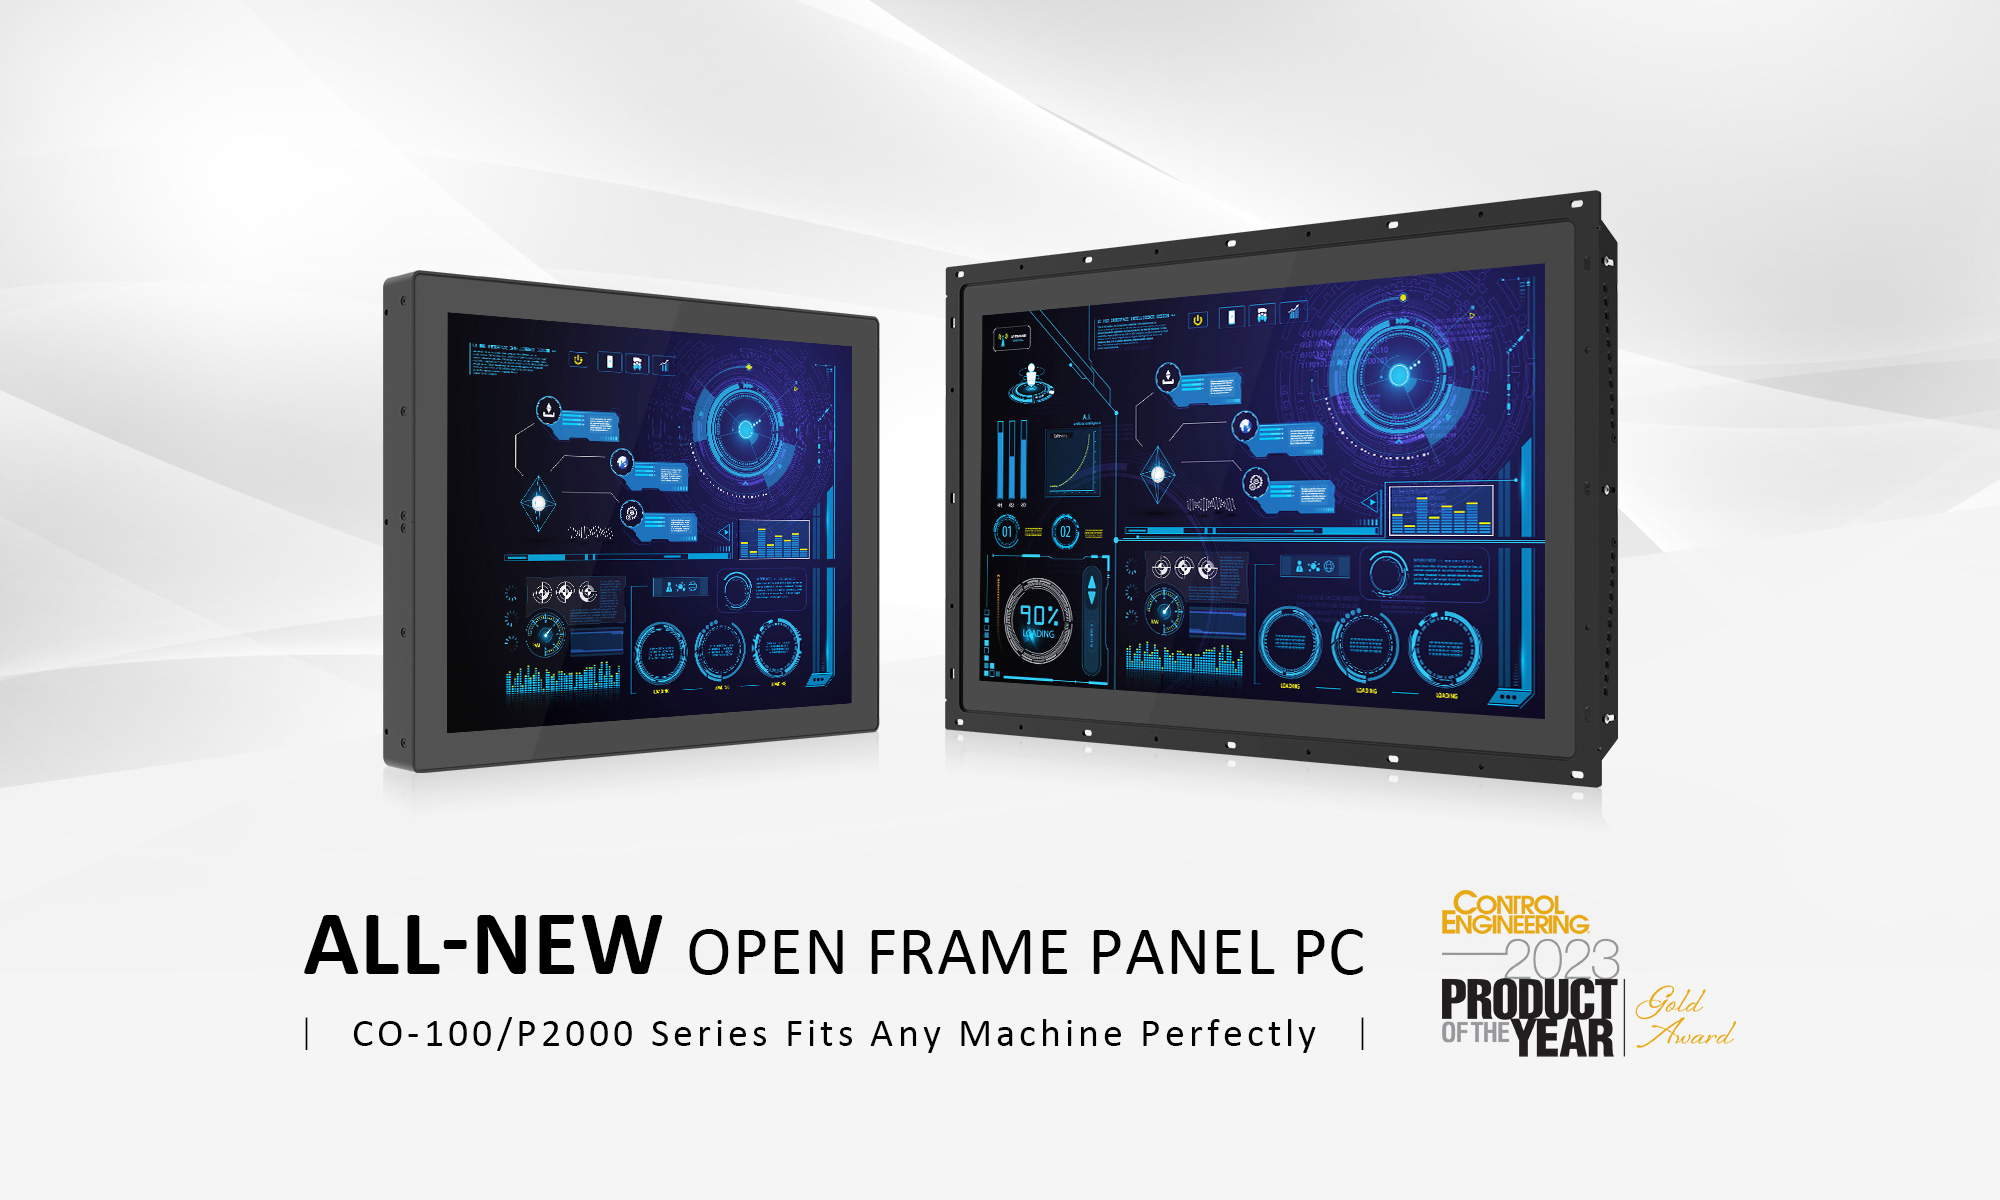 All new open frame panel pc - CO-100/P2002 Series Fits Any Machine Perfectly